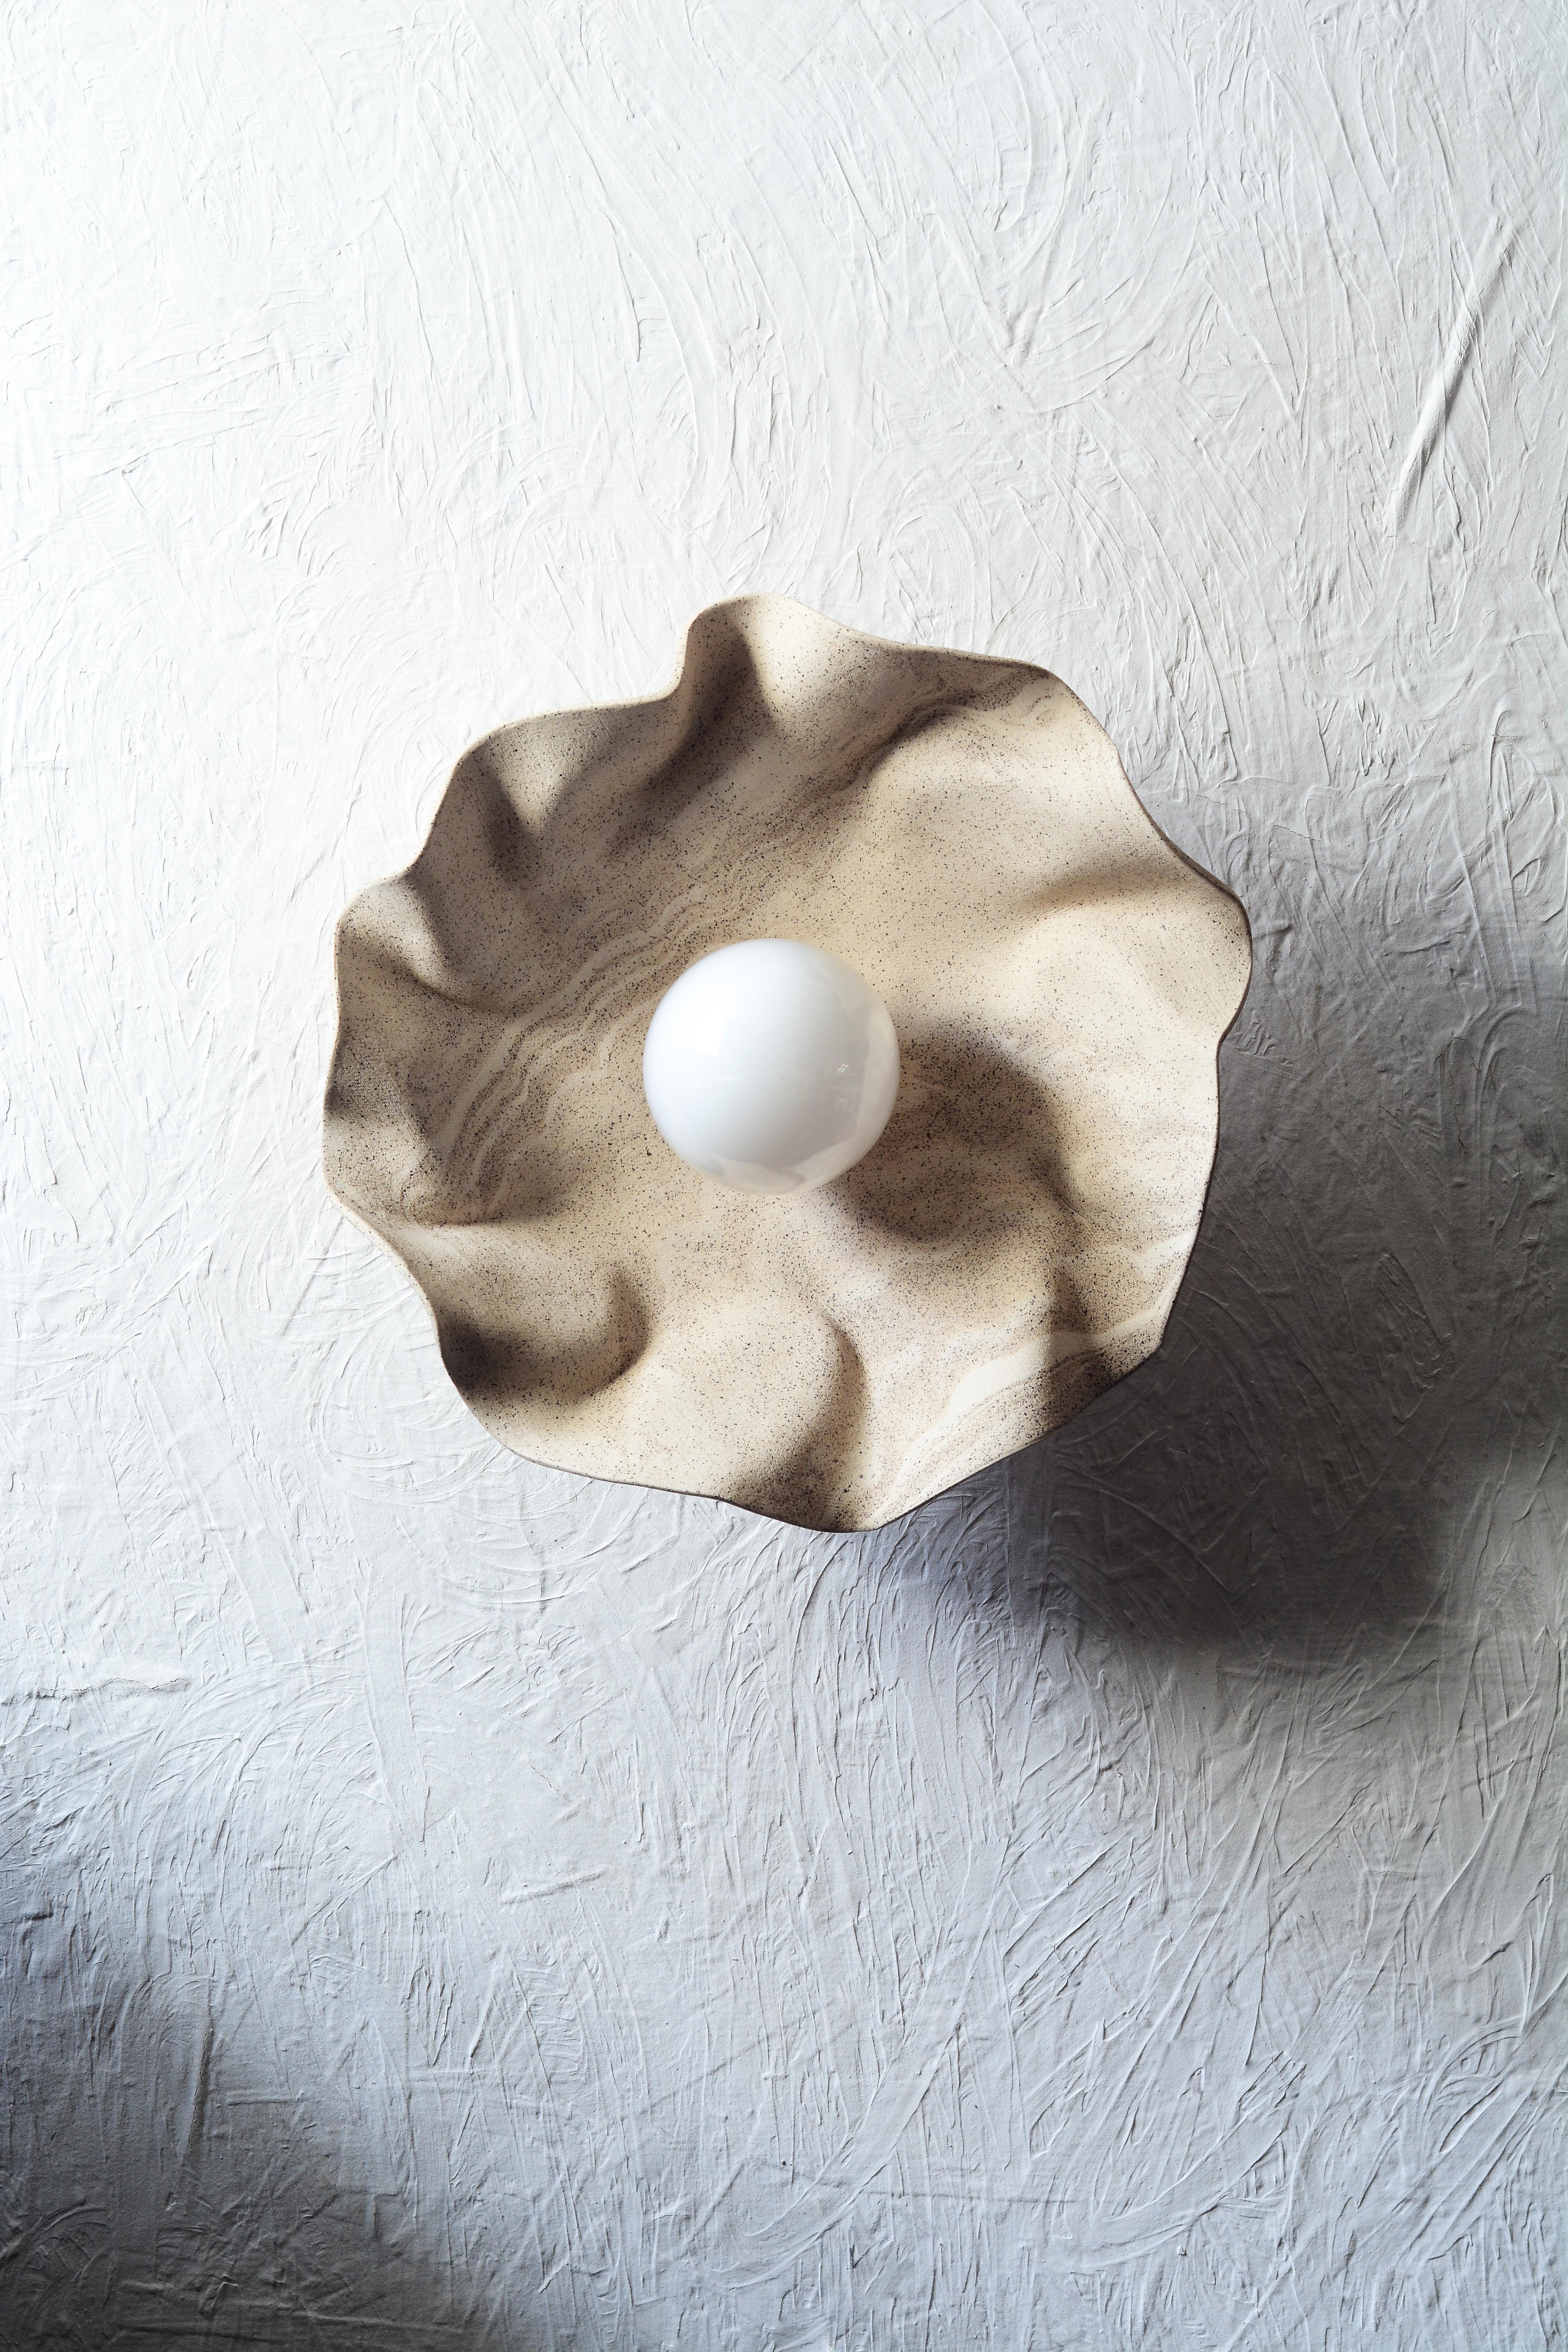 Handbuilt ceramic wall sconce with draped/folded marbled stoneware clay, reminiscent of the natural world.The nature of the technique used to shape the clay adds a touch of uniqueness to each piece.
The sconce features a distinctive design with